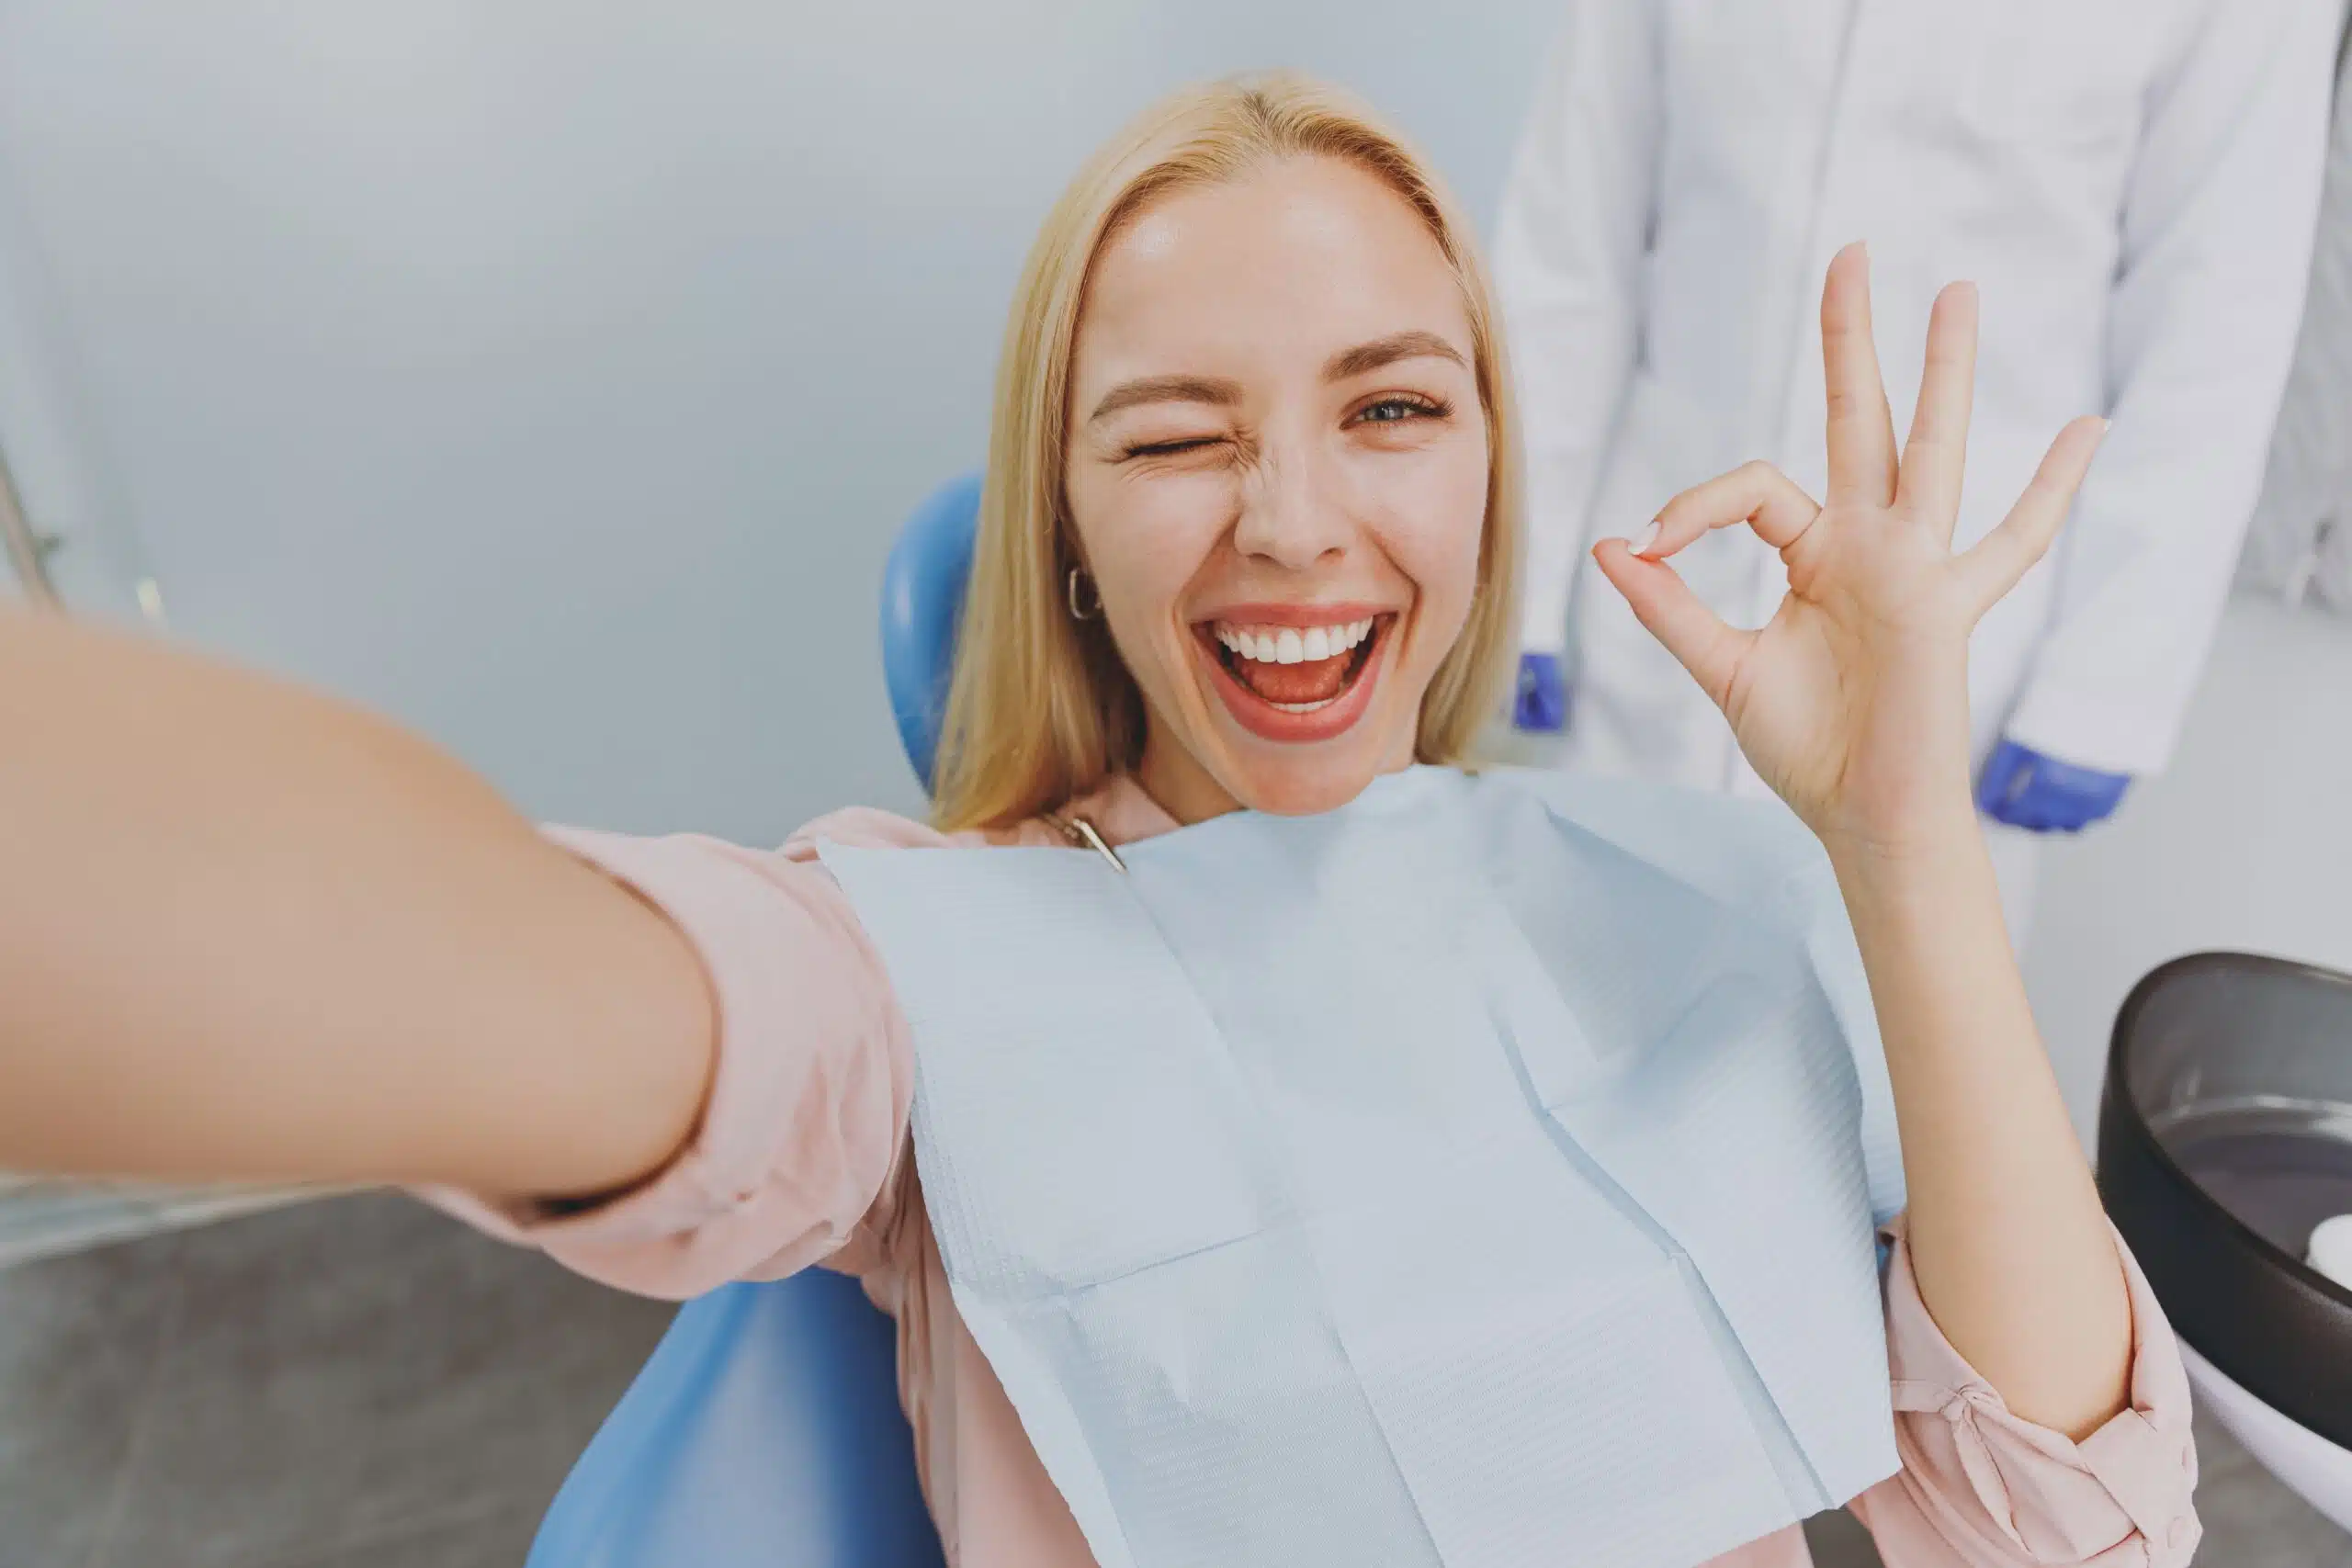 Accidents happen, but our team is here to provide prompt and effective treatment for any dental trauma that may occur.